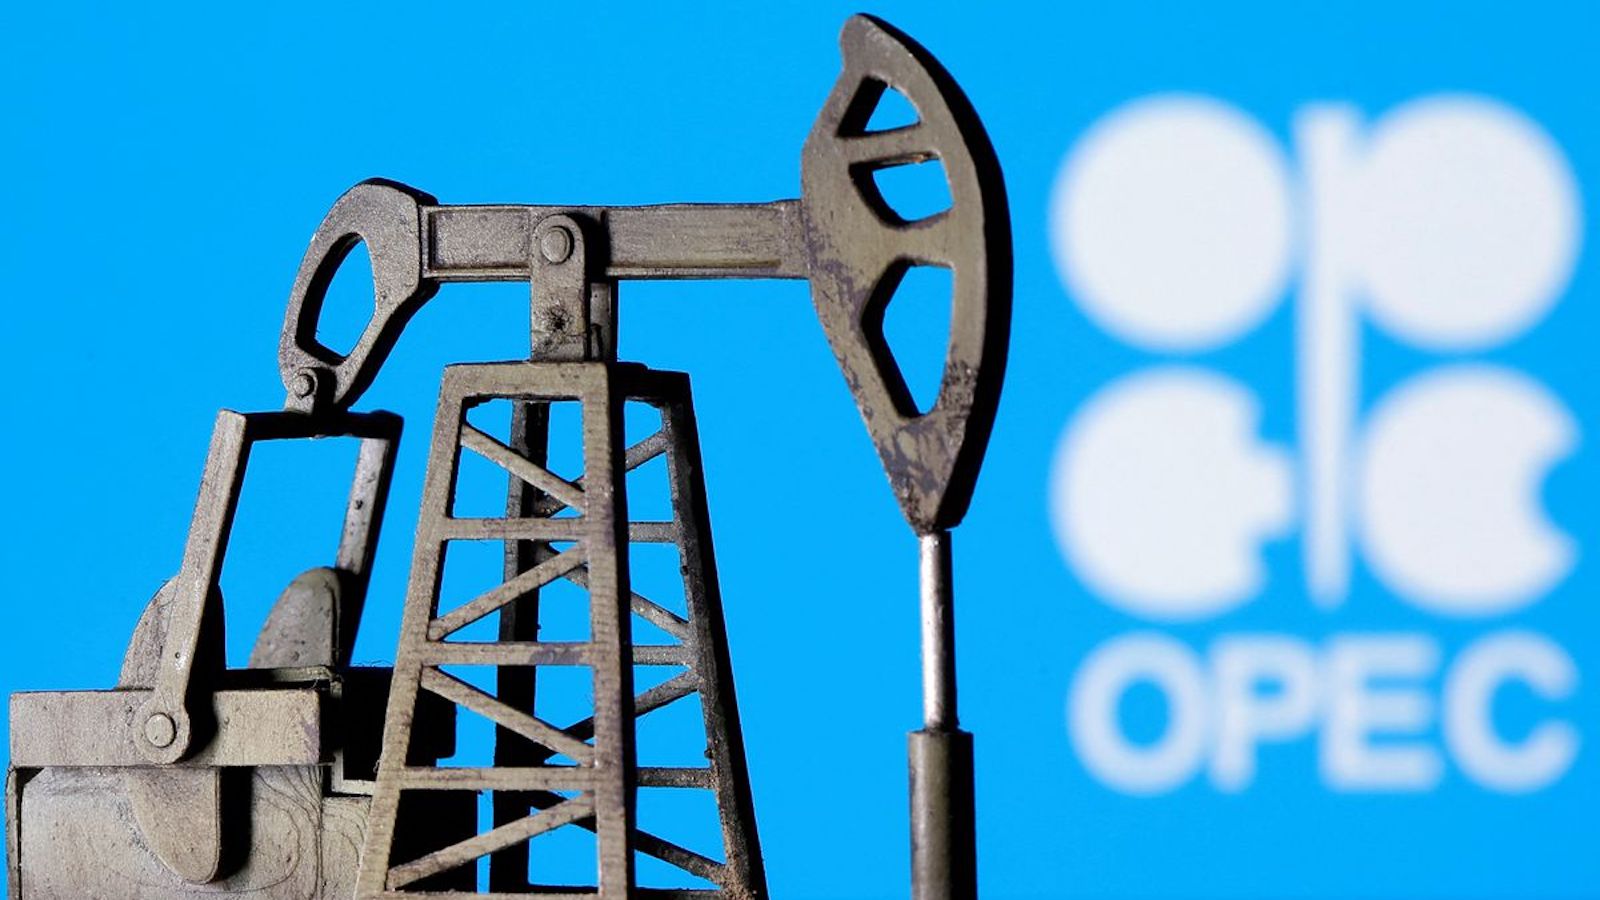 u-s-energy-policy-undermined-by-opec